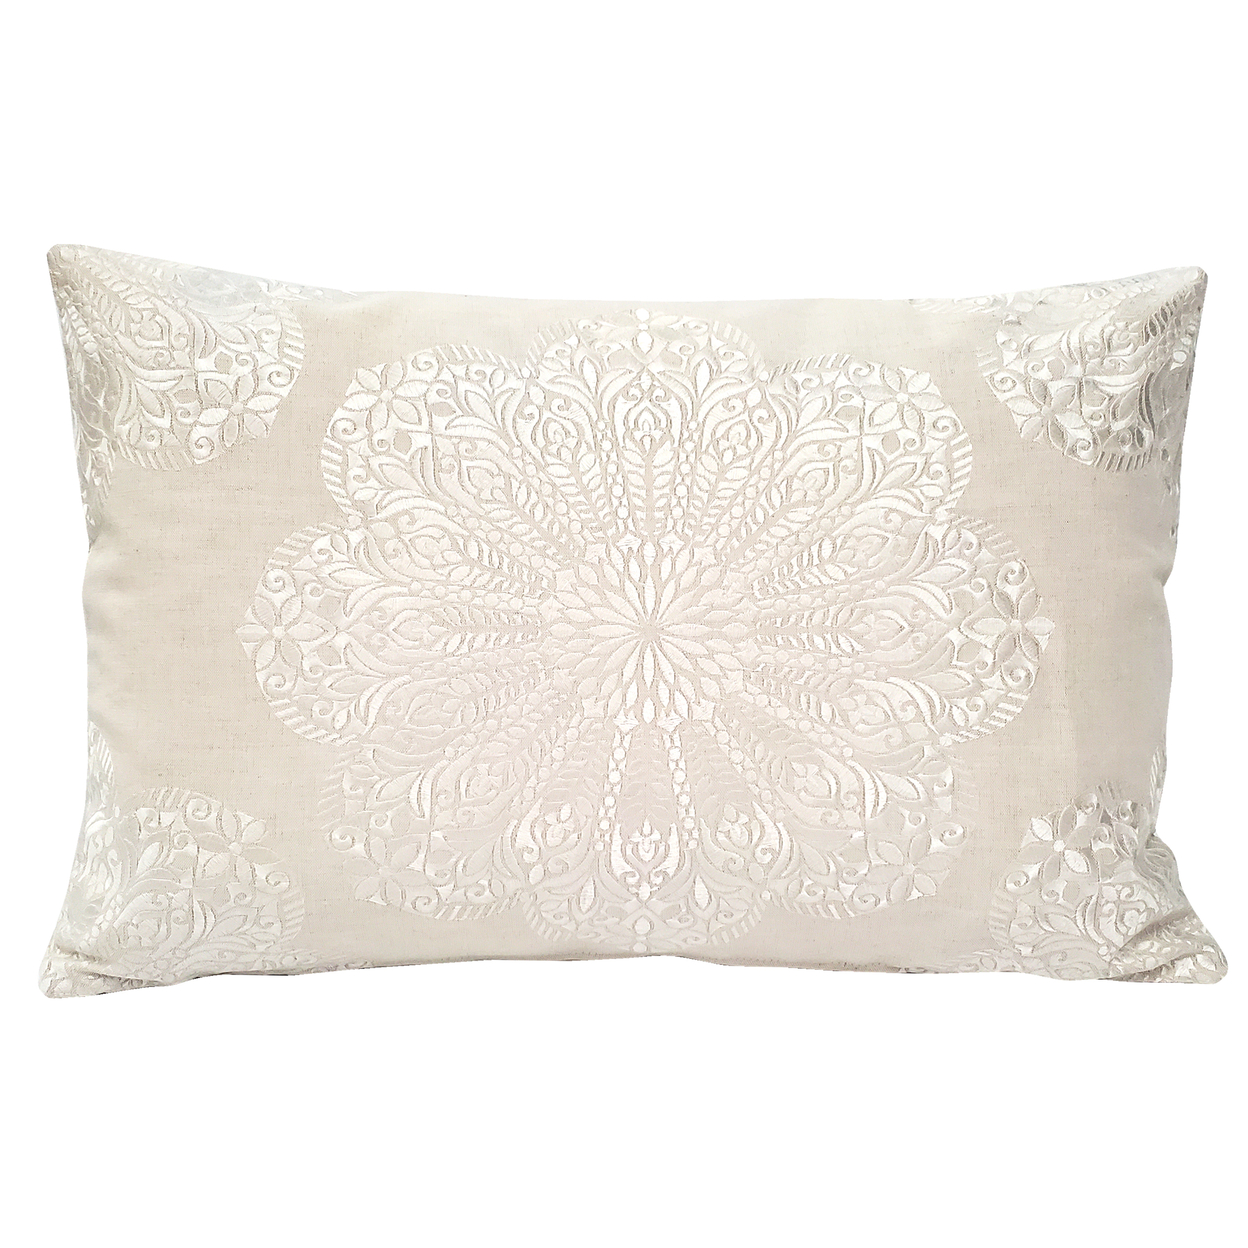 Mancini Natural And Cream Medallion Embroidered Throw Pillow 16x24, With Polyfill Insert